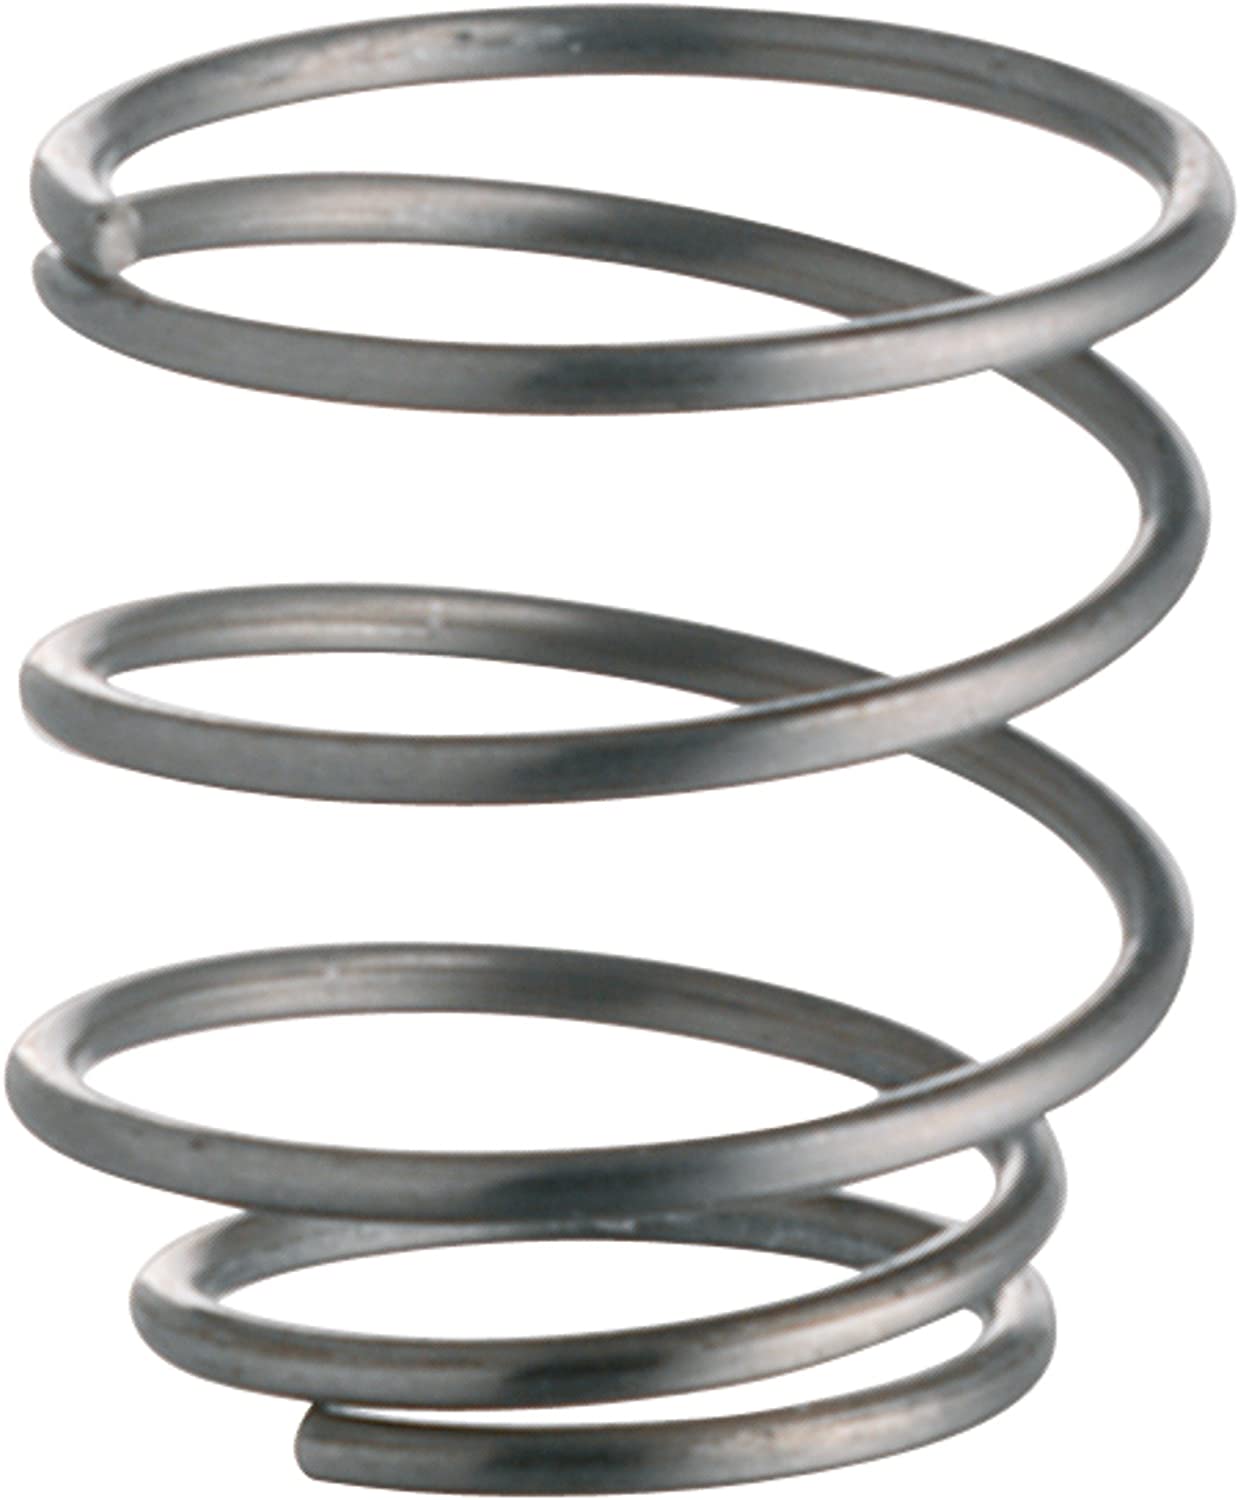 WMF Replacement Spring for Poultry Shears 1892806030